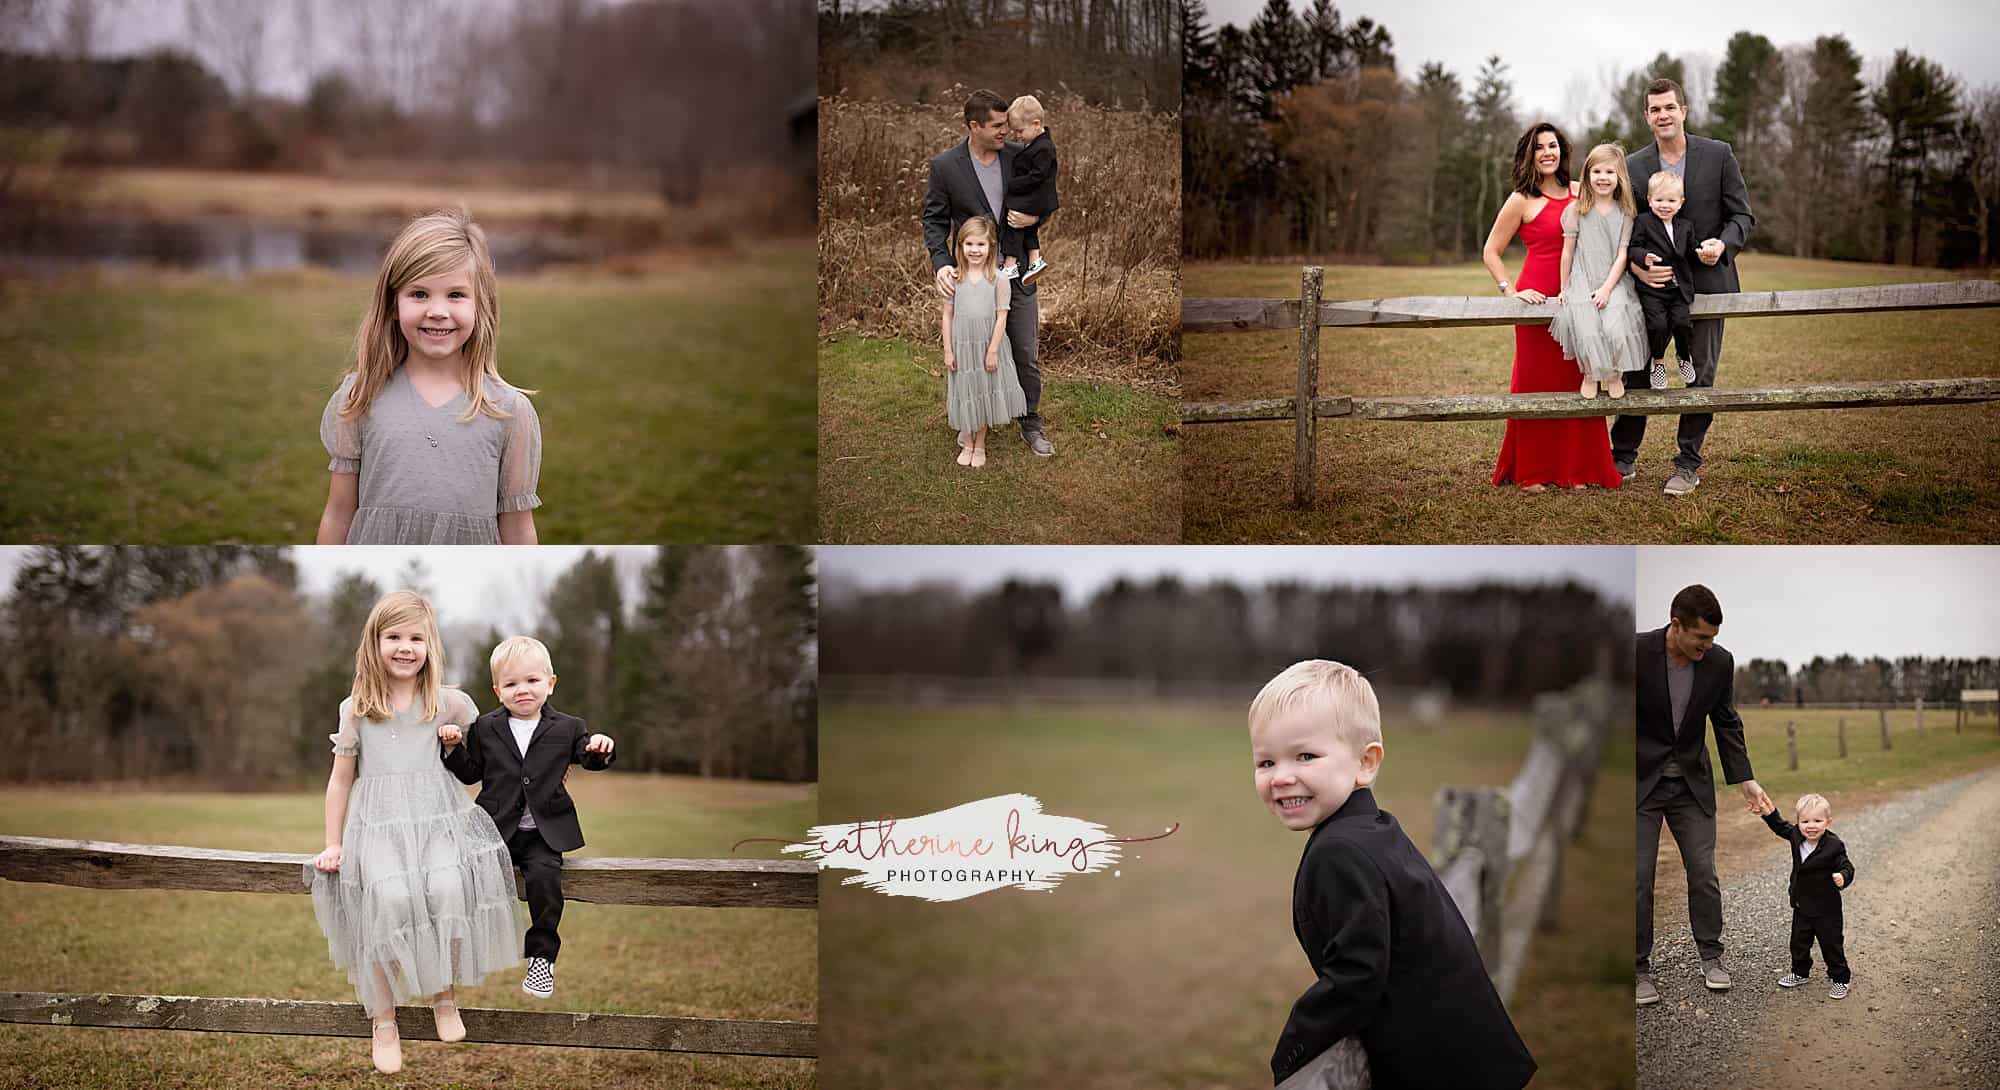 Getting fancy for your family photoshoot - CT Family Photographer